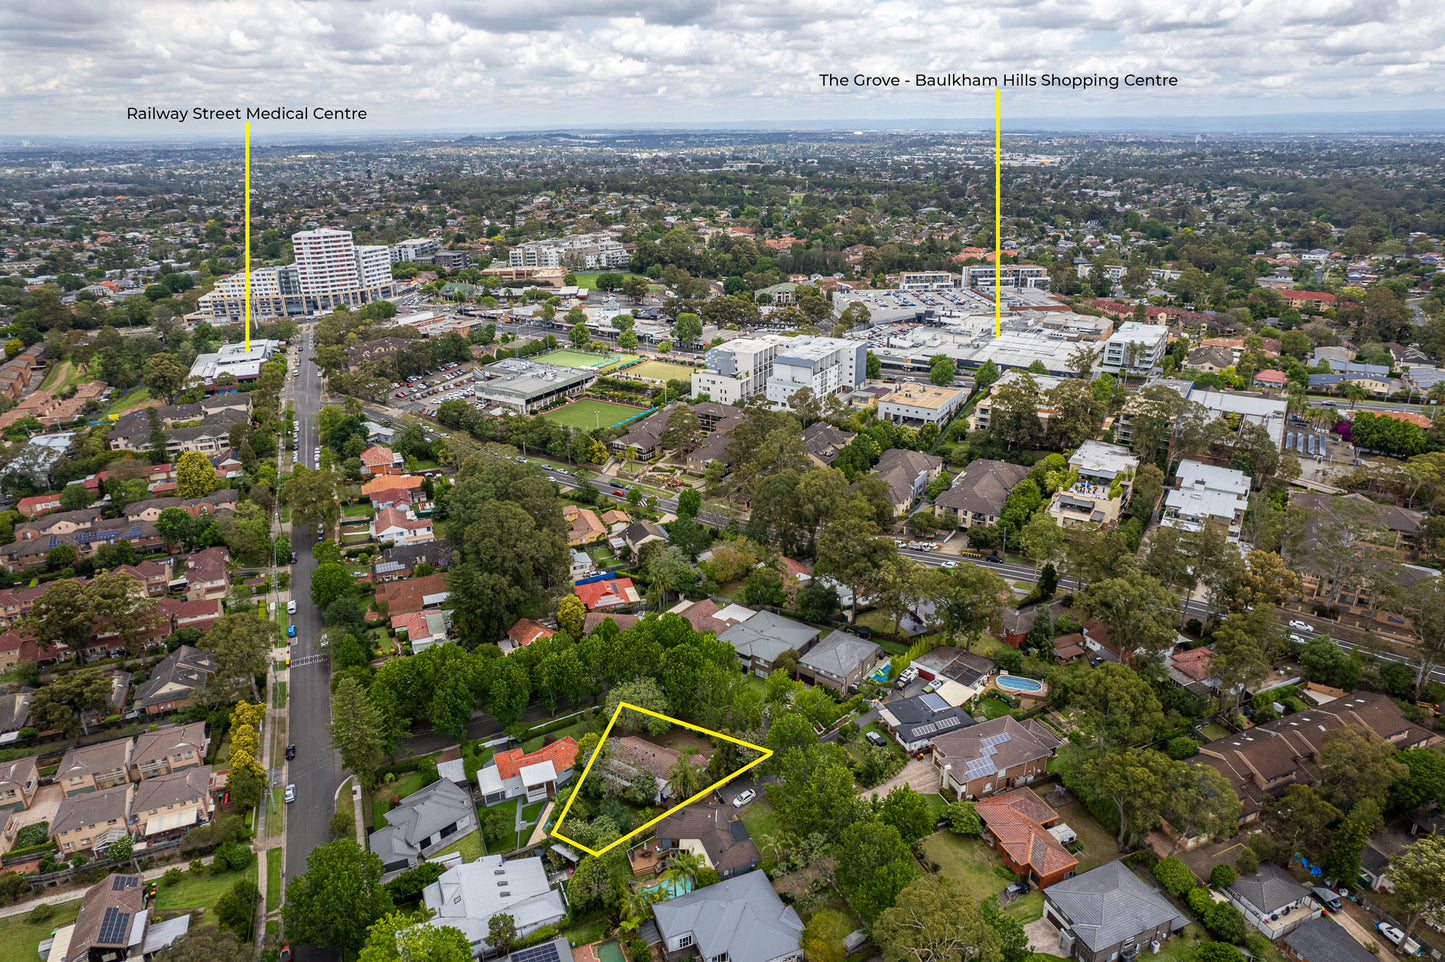 5 Carole Avenue, Baulkham Hills NSW 2153 - ANOTHER SOLD BY THE TEAM AT $1,675,000!